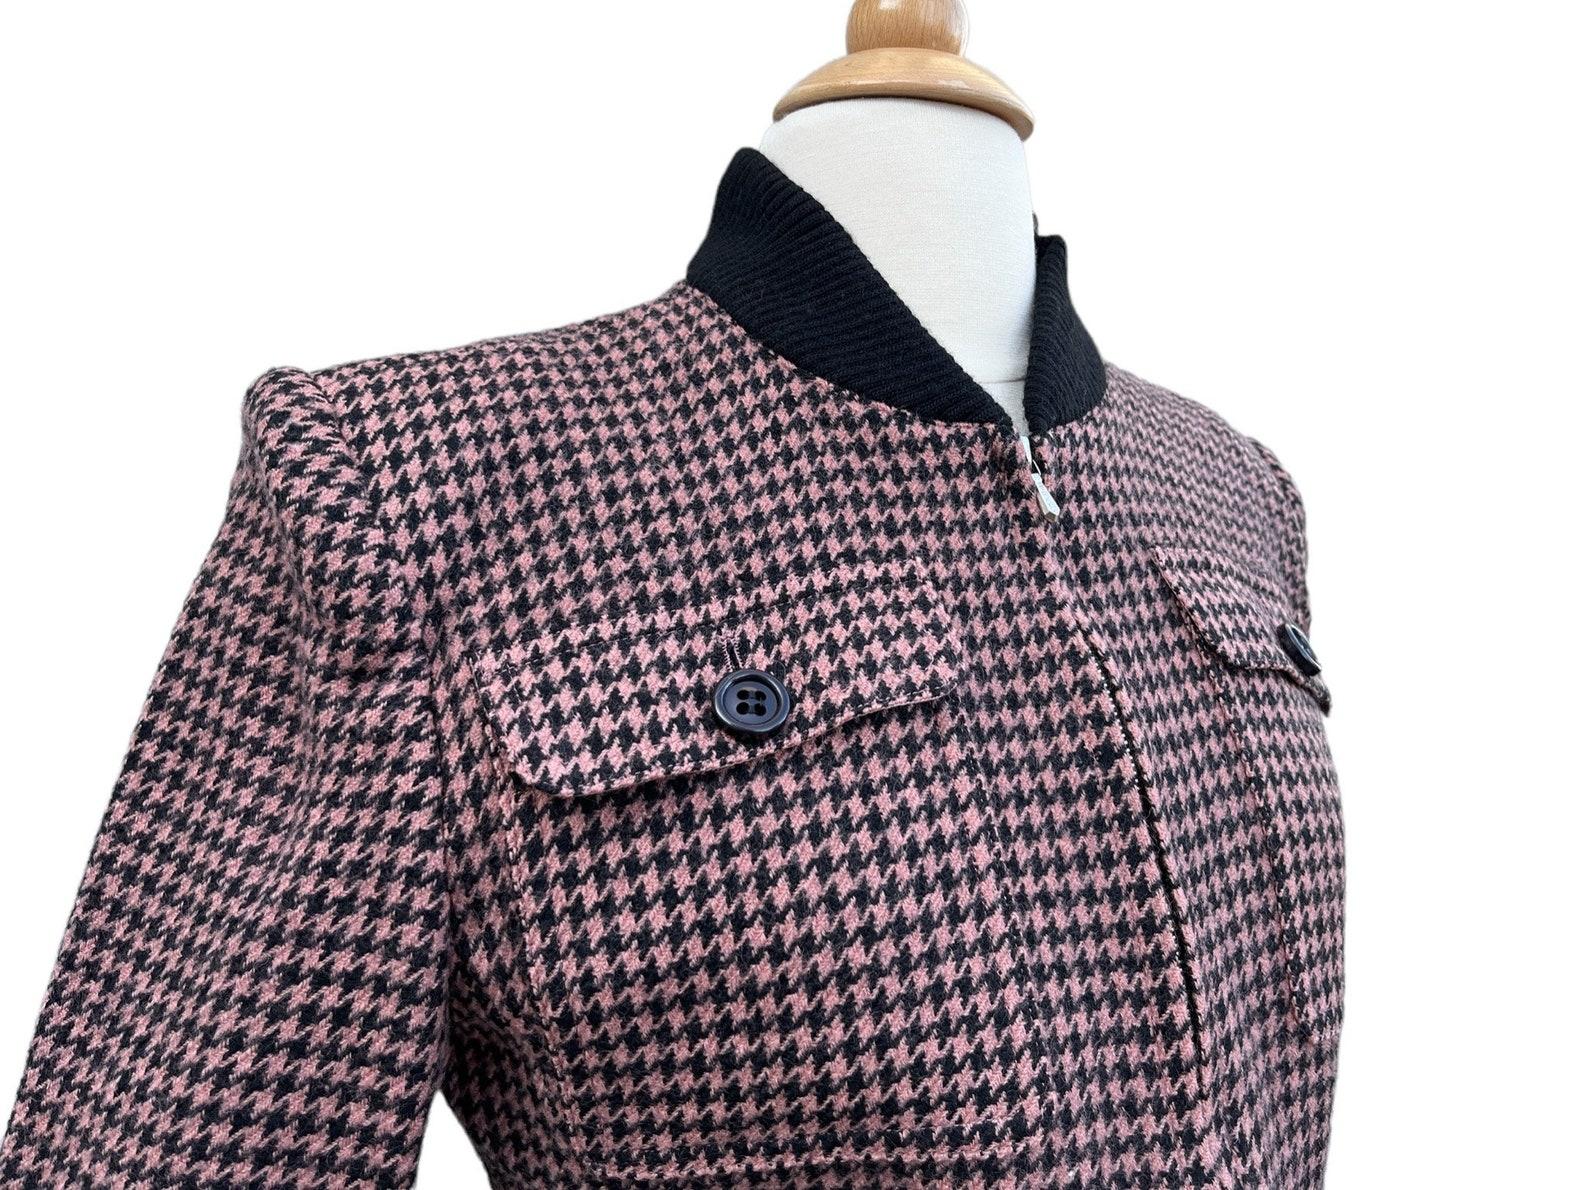 Guy Laroche Houndstooth Jacket, Circa 1980s For Sale 1